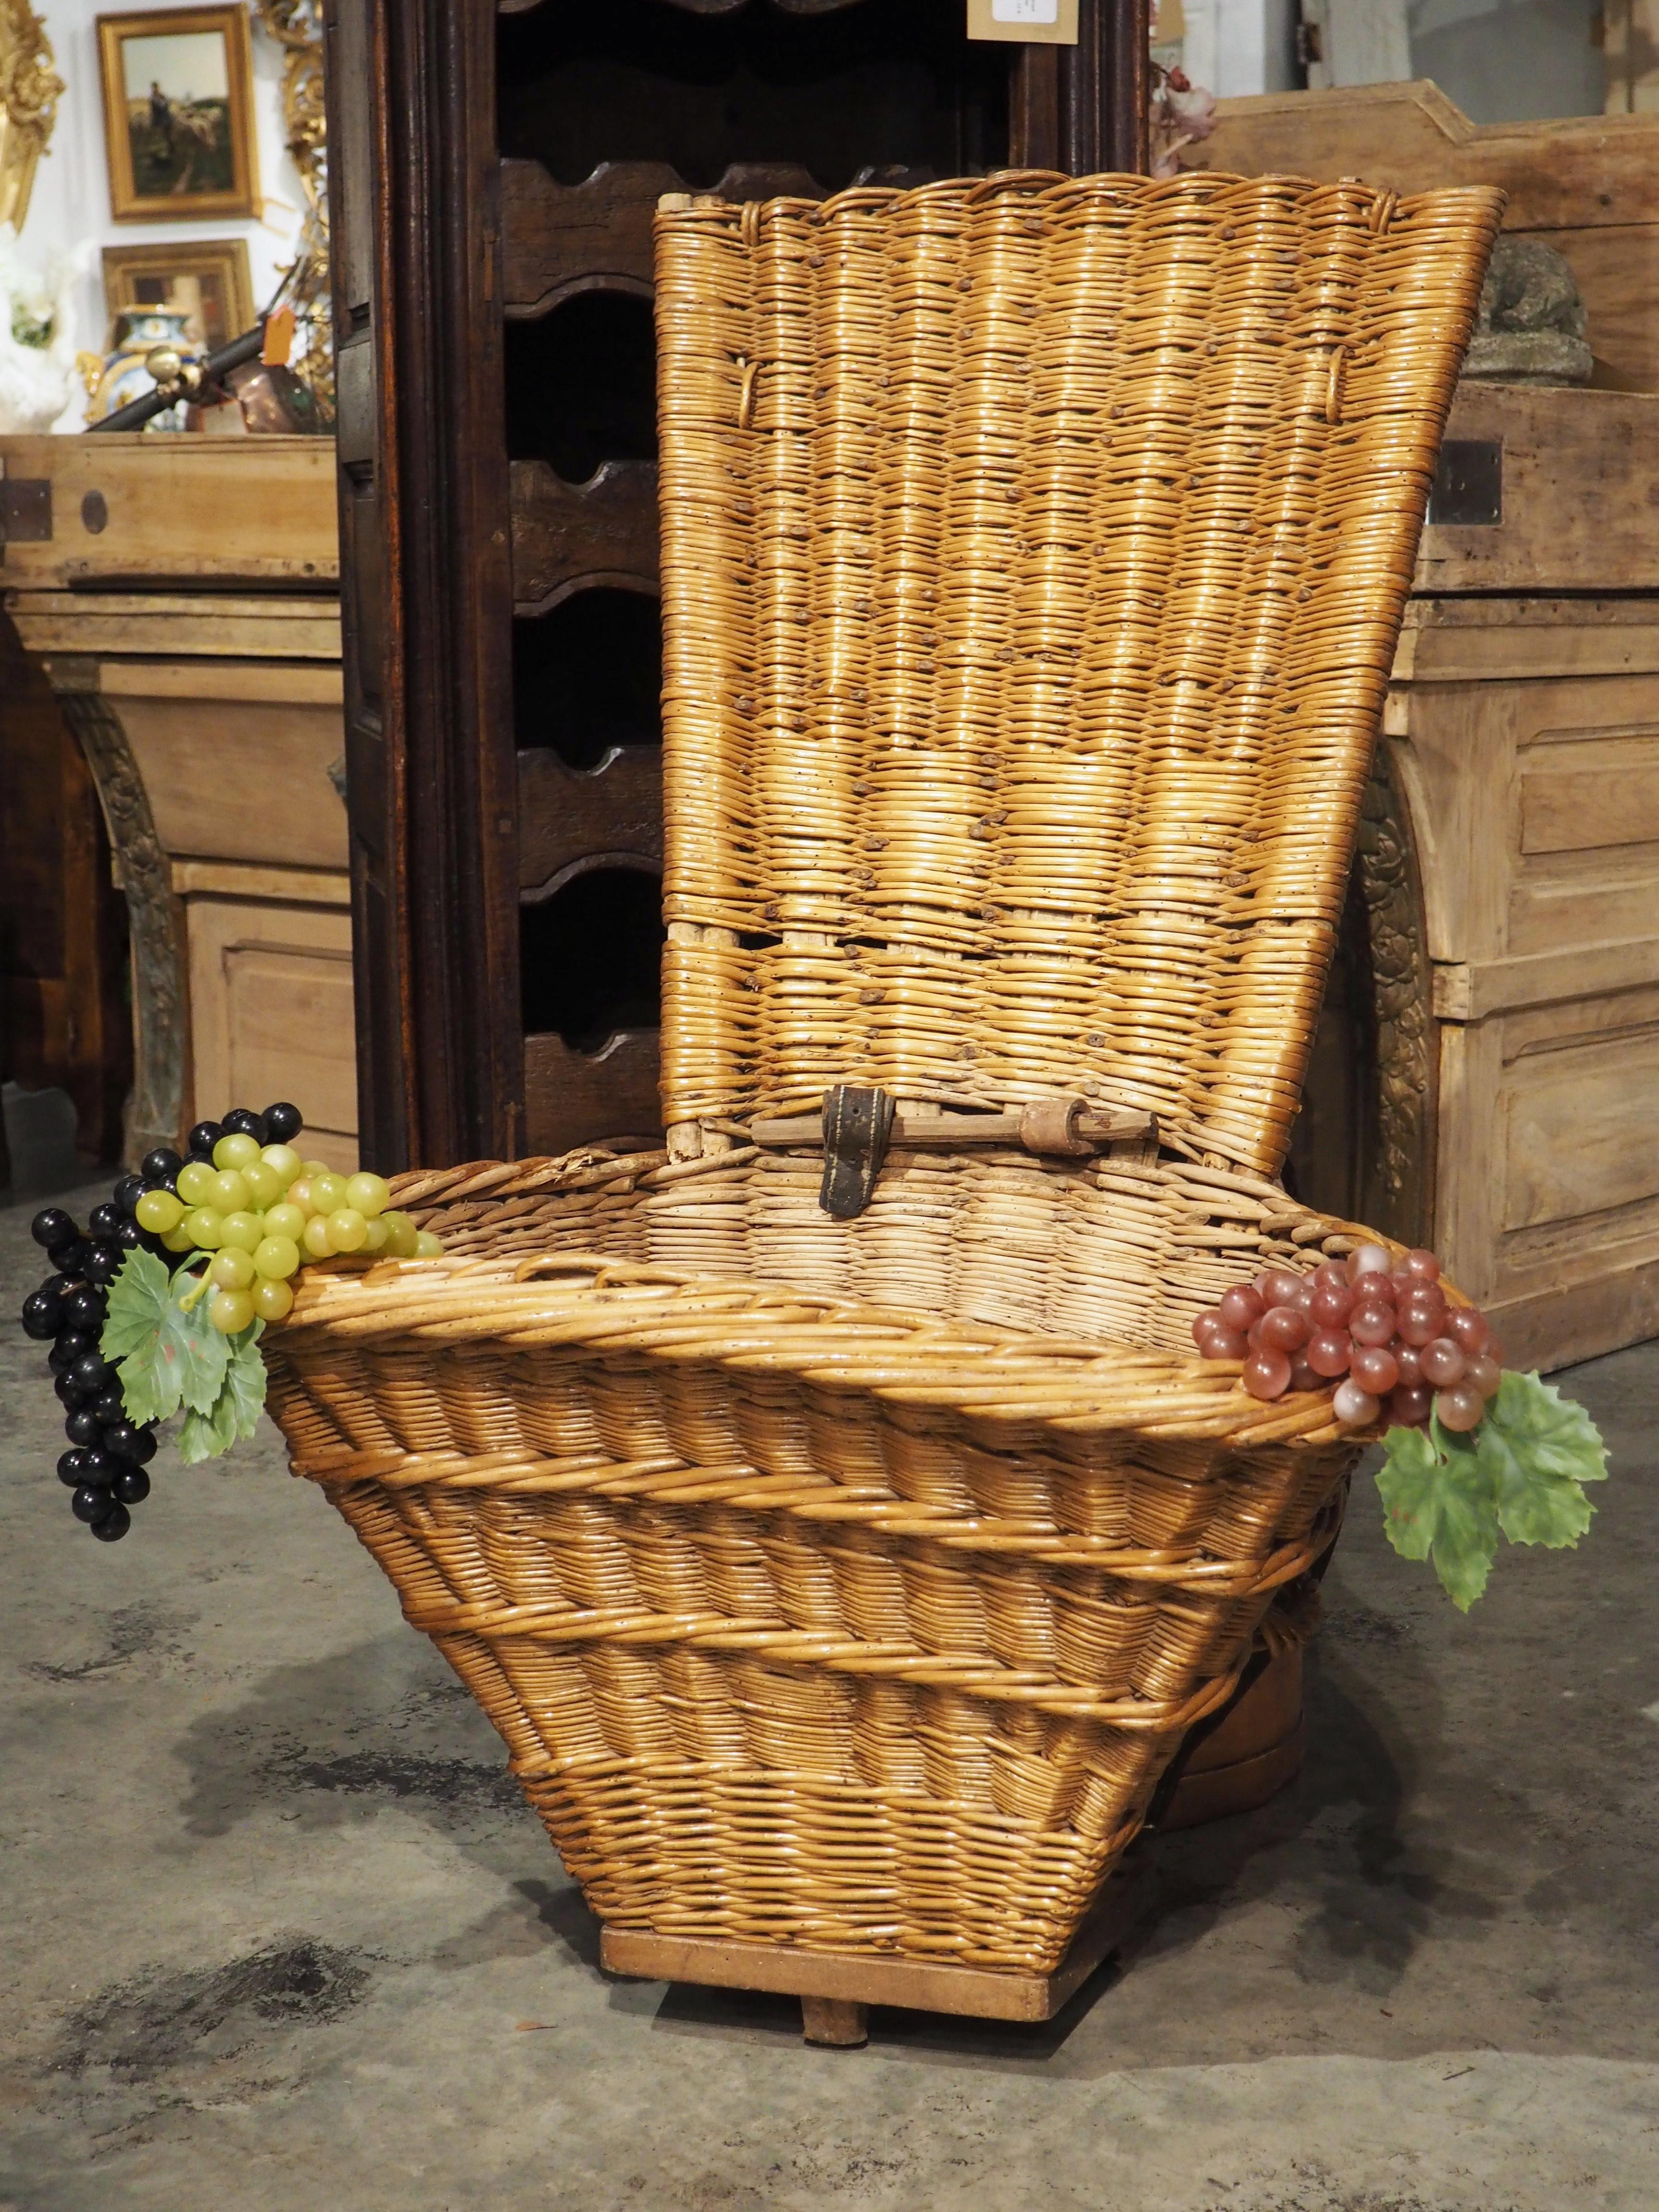 Truly a unique find, this wine grape harvesting basket, or hotte, was handwoven in circa 1890. Many of the grape hottes from the late 19th and early 20th century were made out of metal, but this particular basket, which was found in Beaune, France